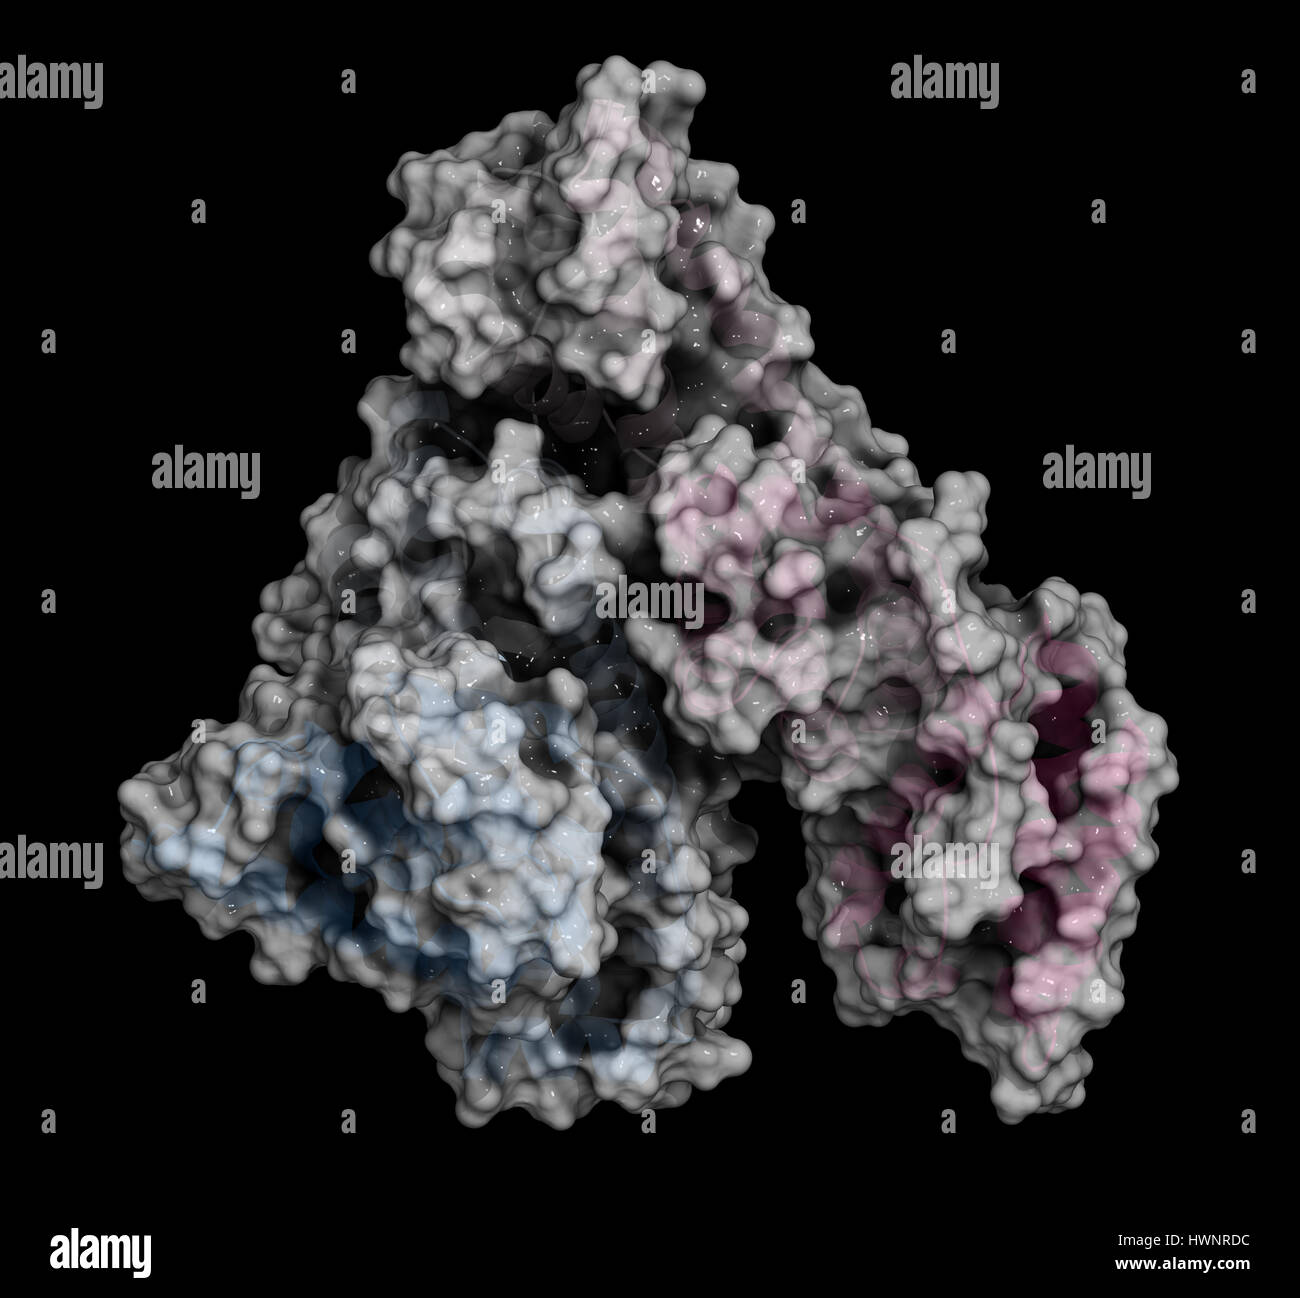 Human serum albumin protein, 3D rendering. Cartoon representation combined with semi-transparent surfaces. Stock Photo